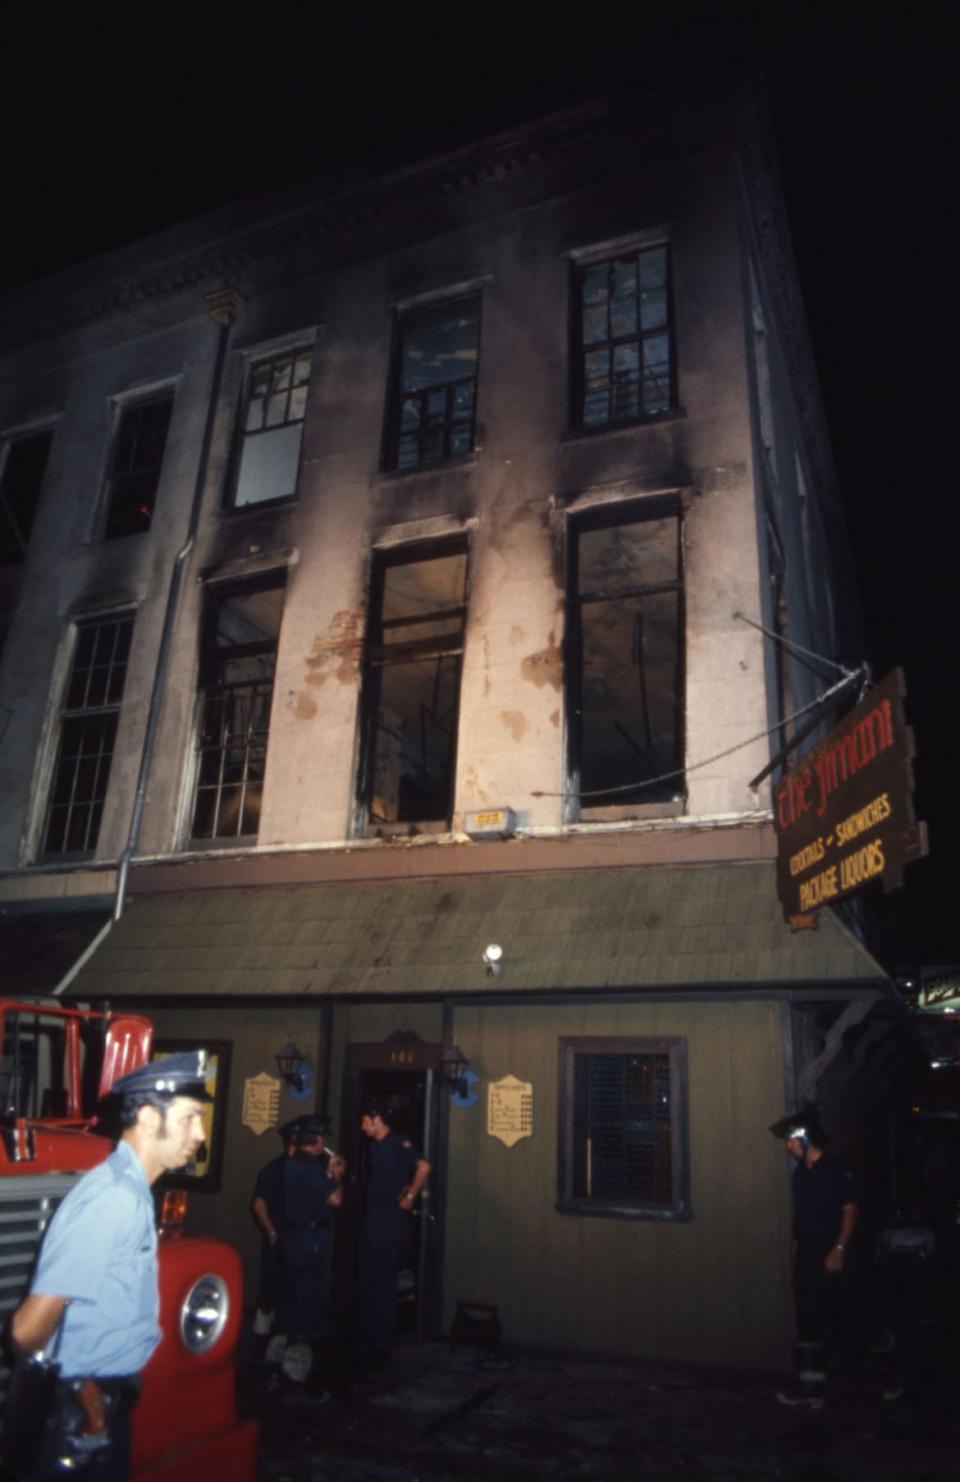 <div class="inline-image__caption"><p>Firemen and rescue workers look up at the burned-out UpStairs Lounge.</p></div> <div class="inline-image__credit">Bettmann</div>